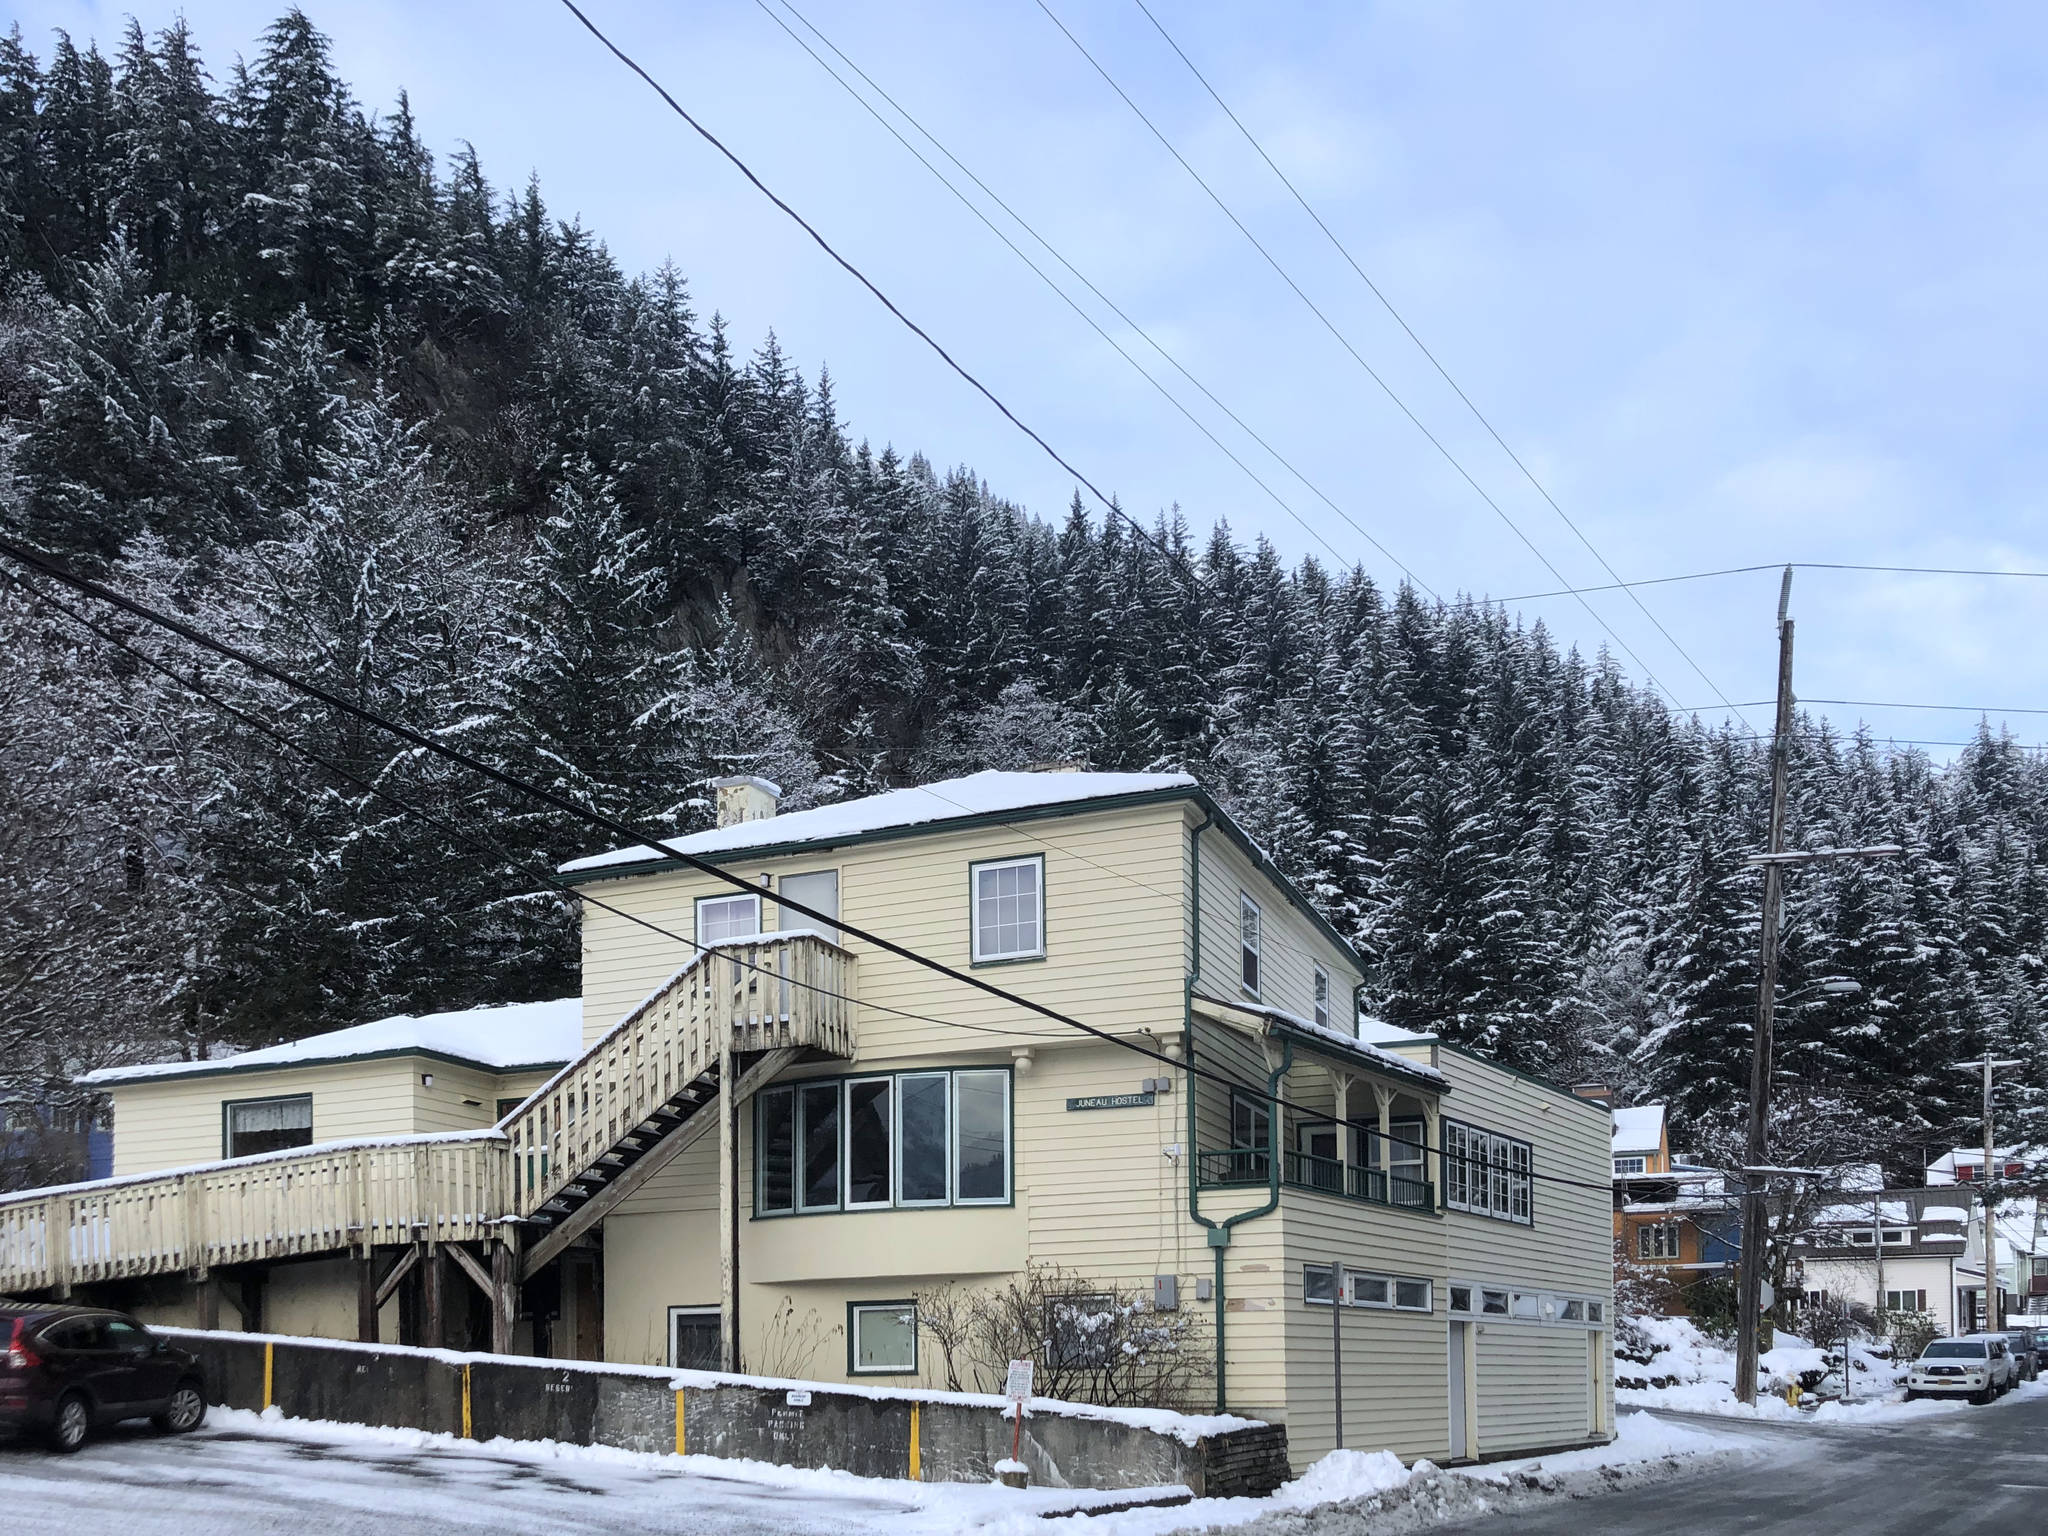 Courtesy Photo / Jeff Gnass
This photo shows the Juneau Youth Hostel. The youth hostel is seeking board members.
This photo shows the Juneau Youth Hostel. The youth hostel is currently seeking board members. (Courtesy Photo / Jeff Gnass)